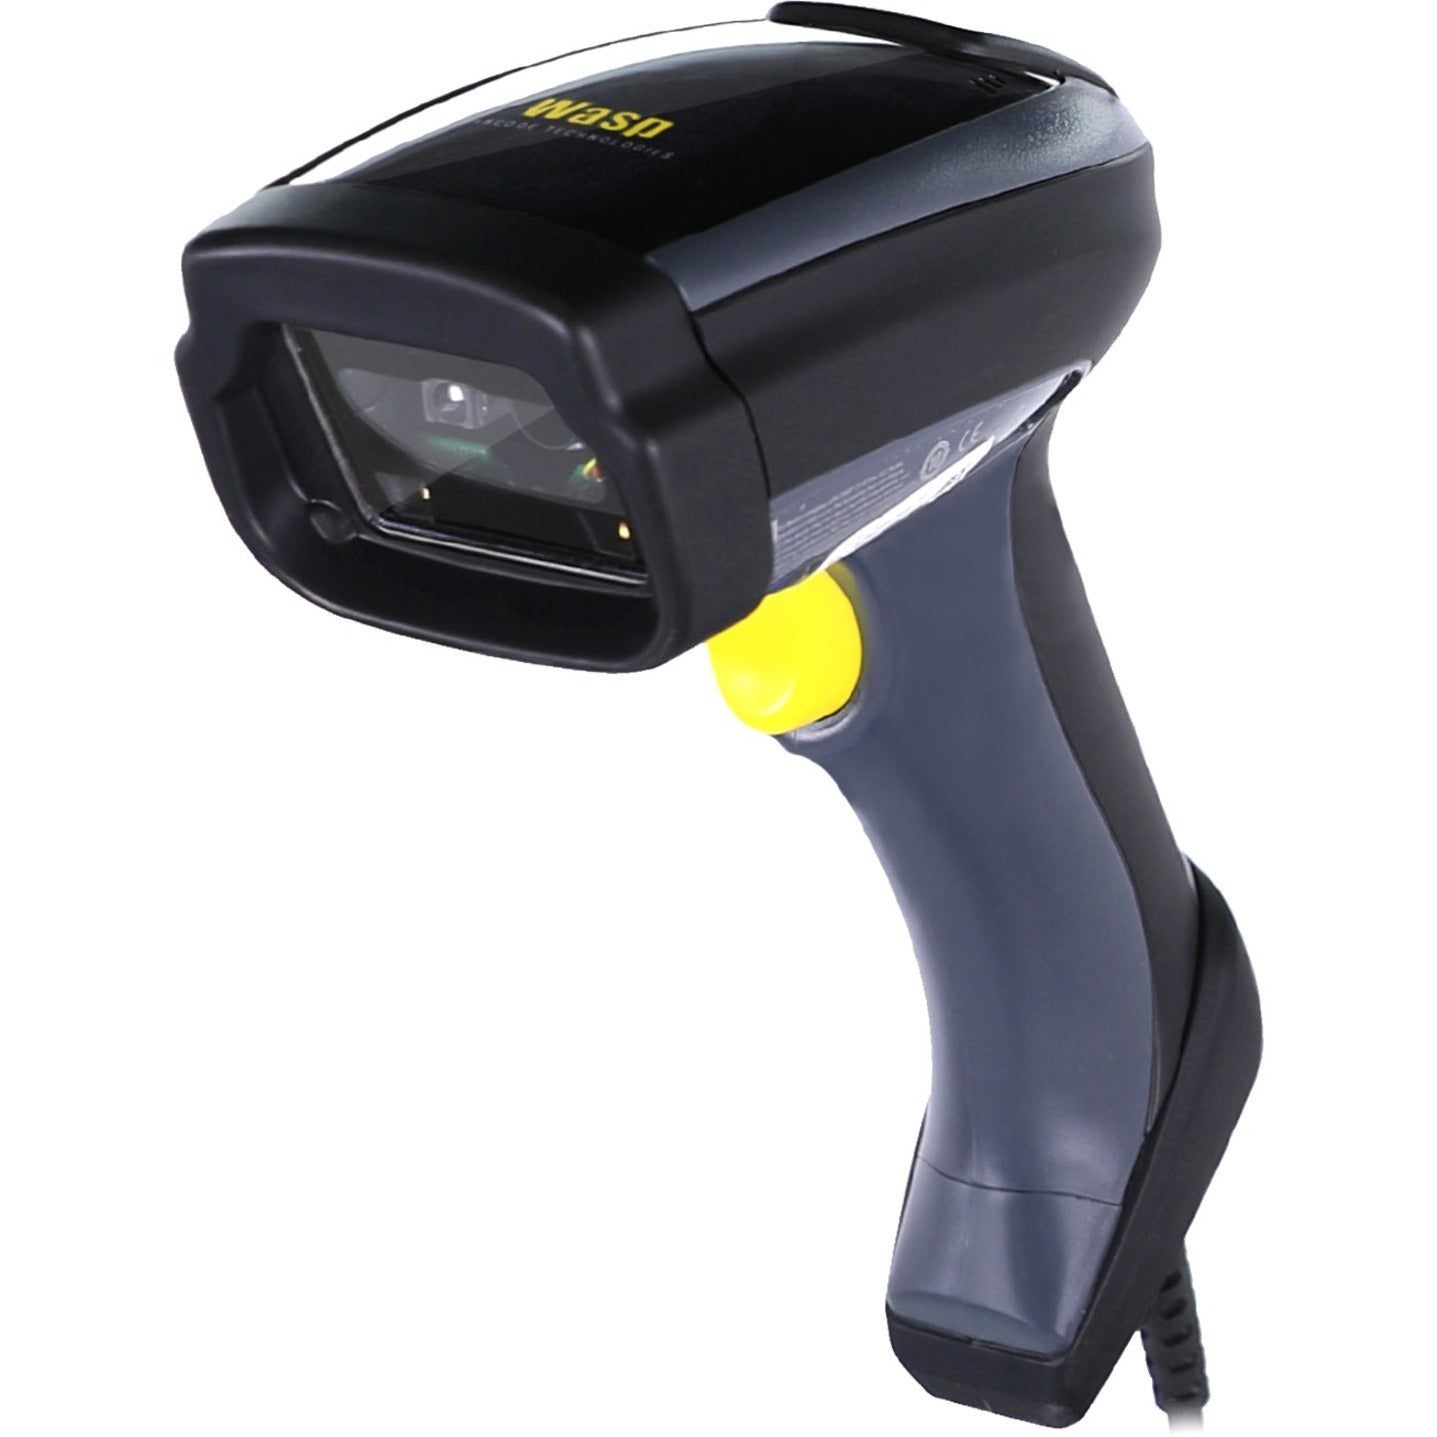 Wasp 633809002830 WDI7500 2D Barcode Scanner, USB Cable Included, Imager Sensor, Black and Yellow, 2 Year Warranty